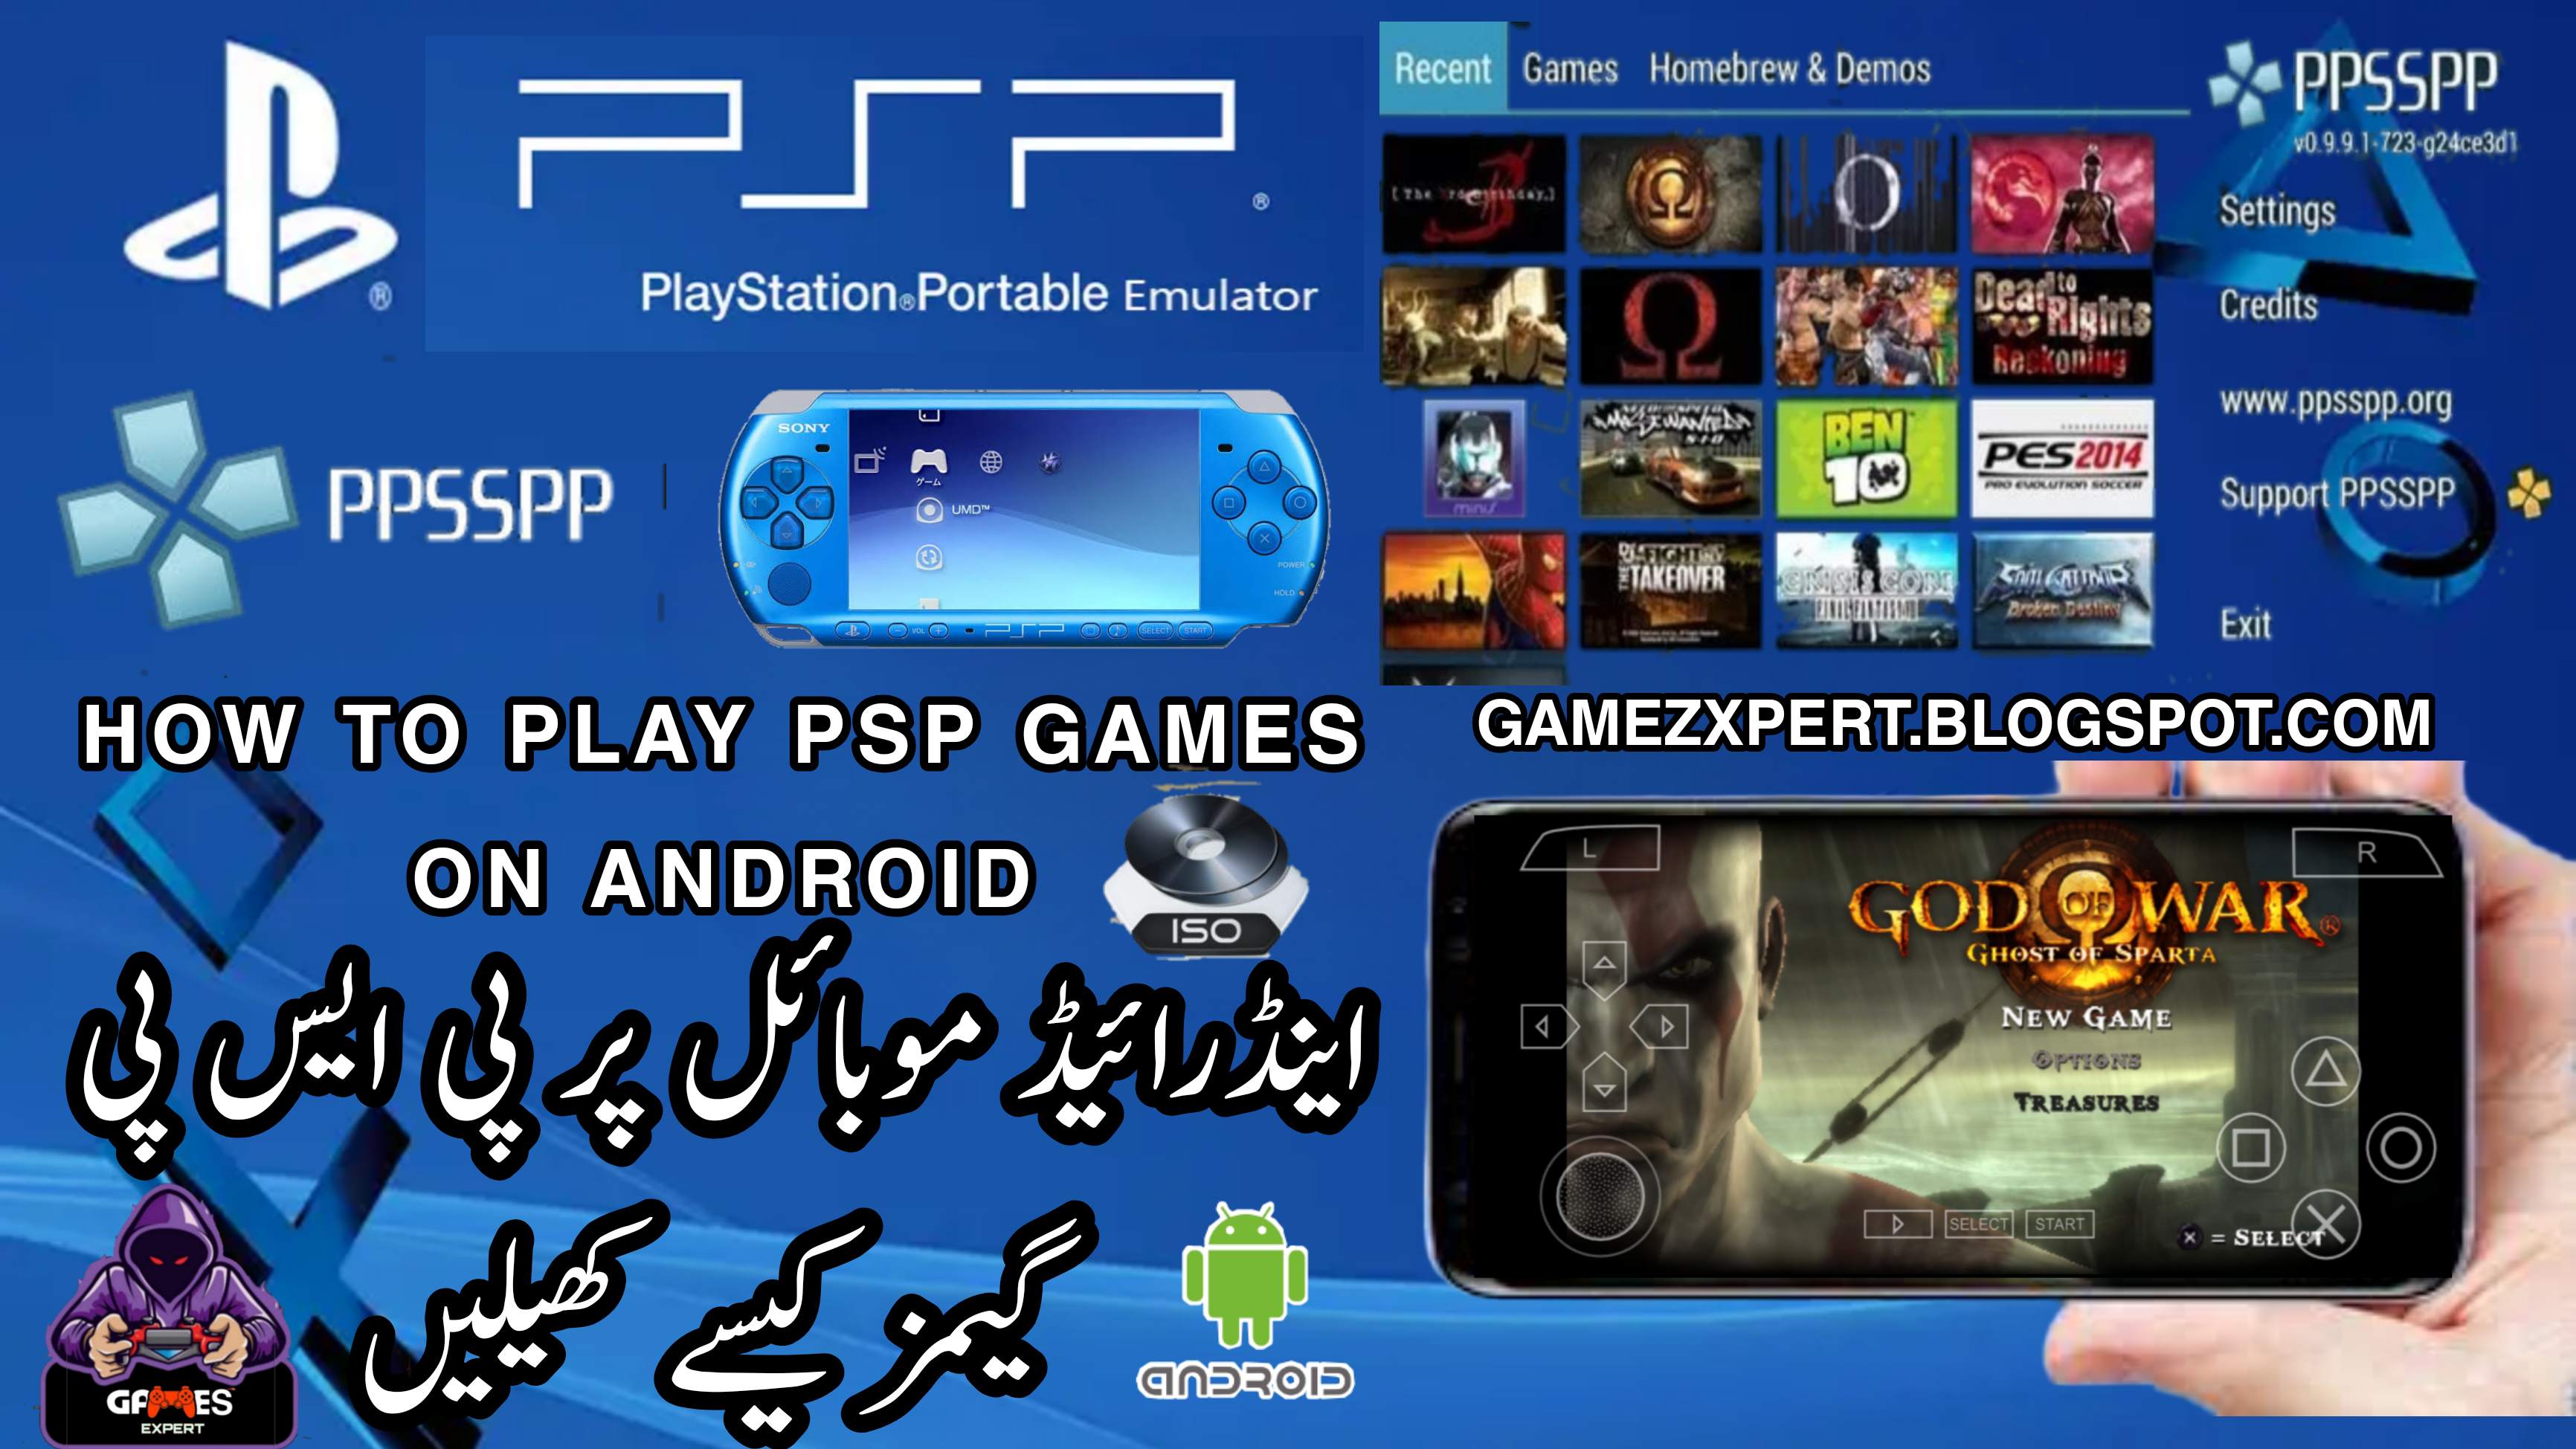 HOW TO PLAY PSP GAMES ON PC, LINUX, MACOS, & ANDROID DEVICES